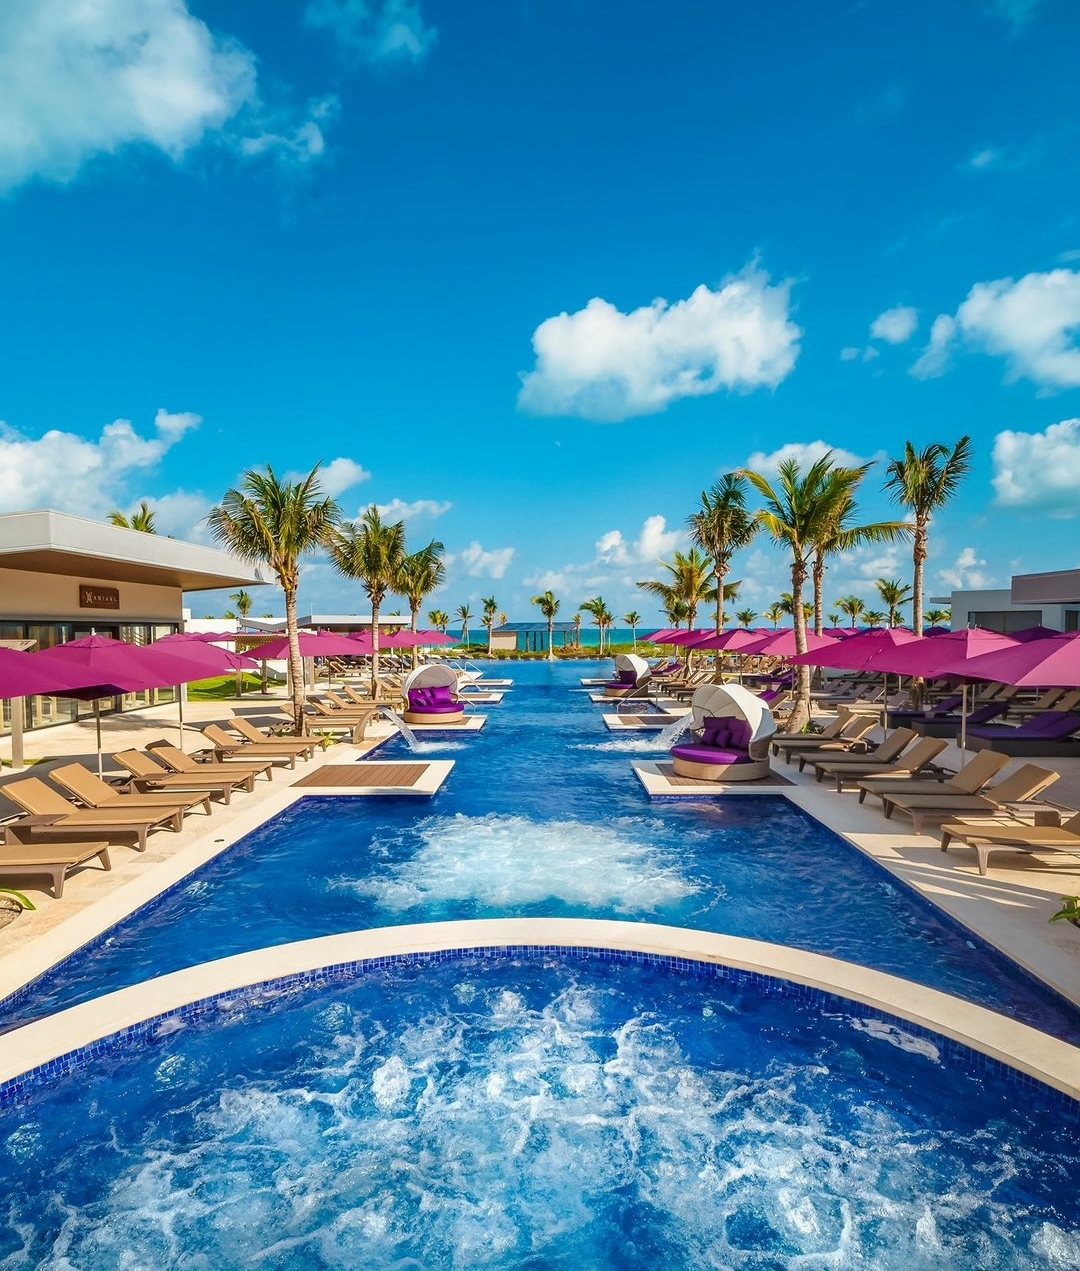 Hollywood Opens It's First AllInclusive Resort In Cancun